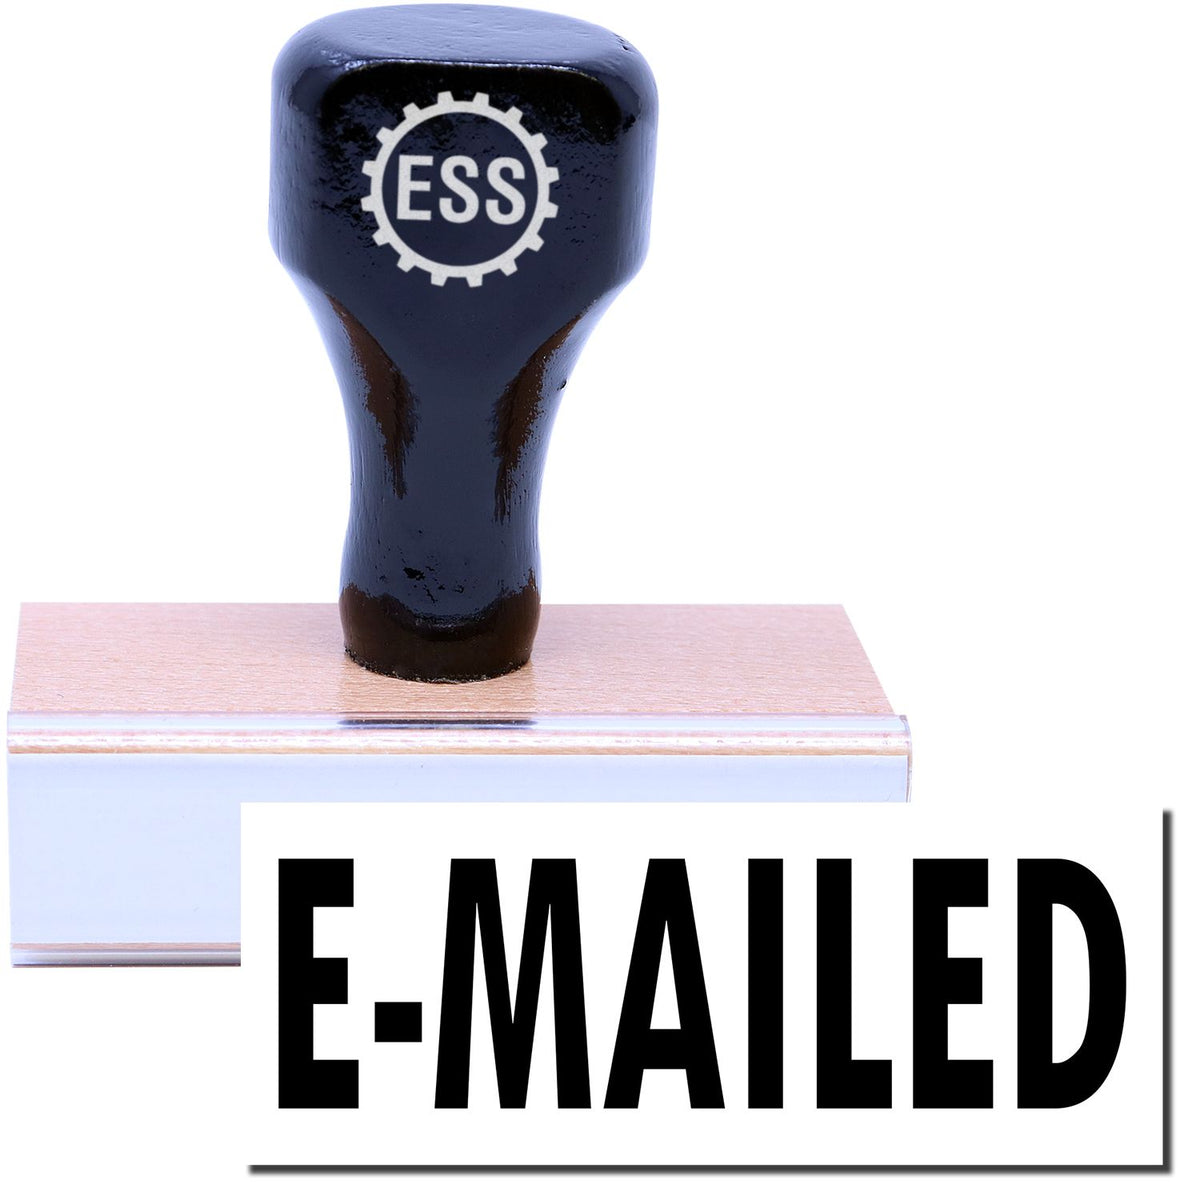 A stock office rubber stamp with a stamped image showing how the text &quot;E-MAILED&quot; in a large font is displayed after stamping.